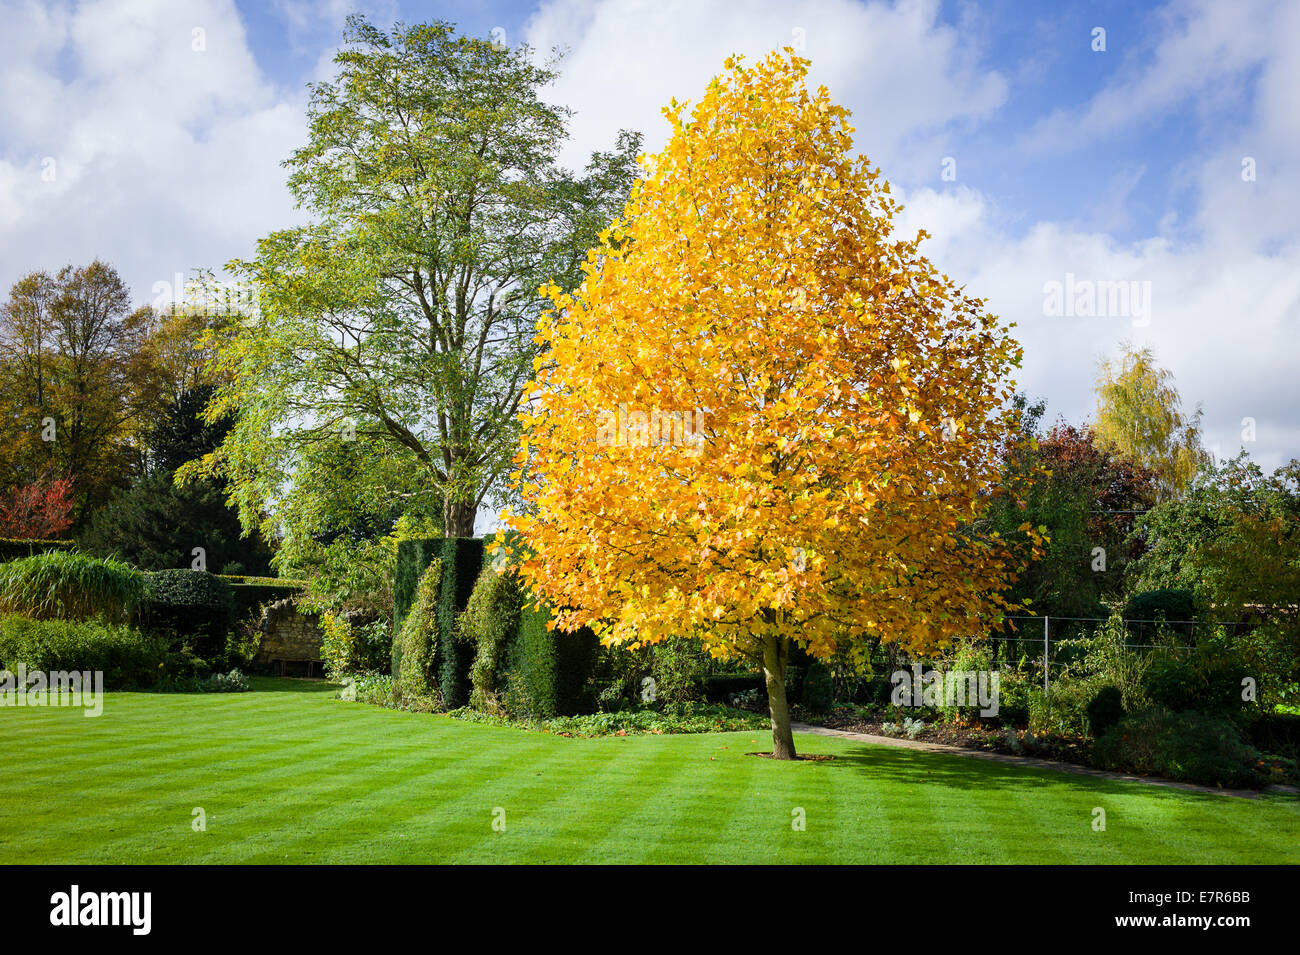 Young Liriodendron tree showing autumn colour in UK Stock Photo